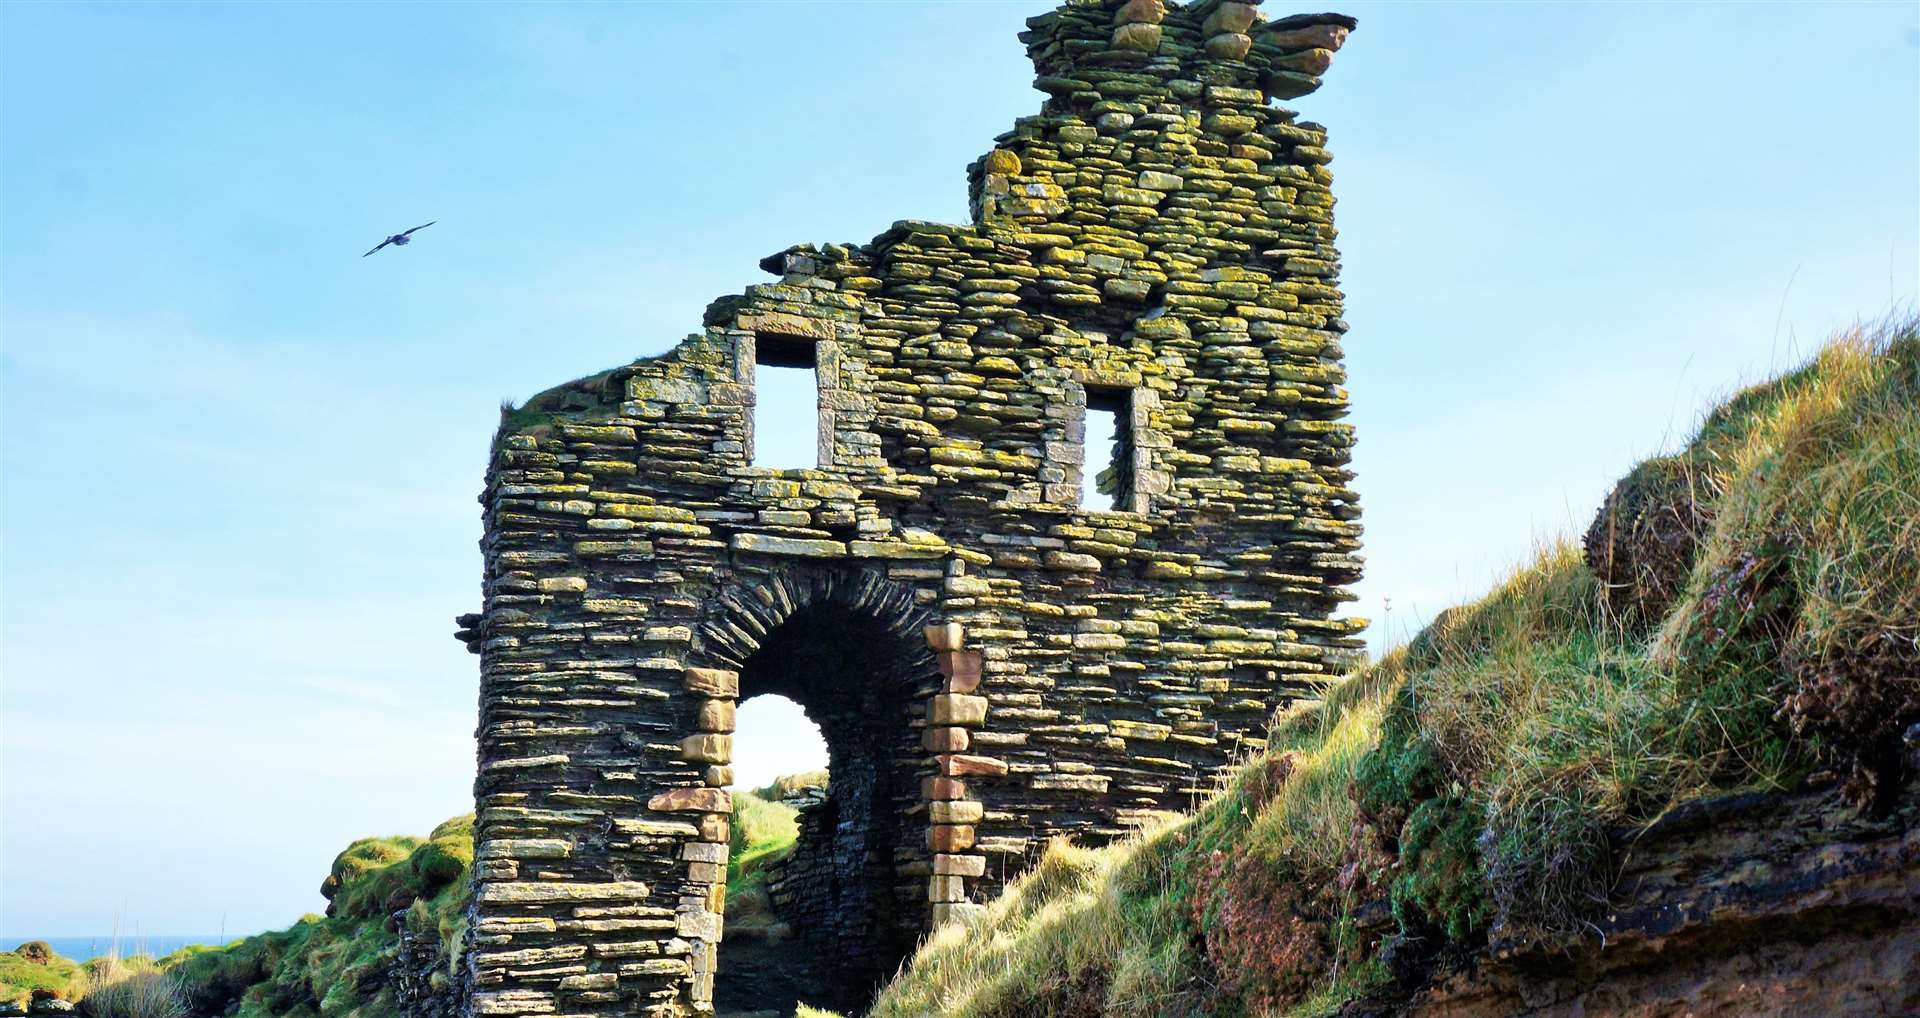 Bucholie Castle is sited on sheer cliffs near Freswick on the NC500 route. The figure could be seen climbing the steep incline over the left hand side window. Picture: DGS